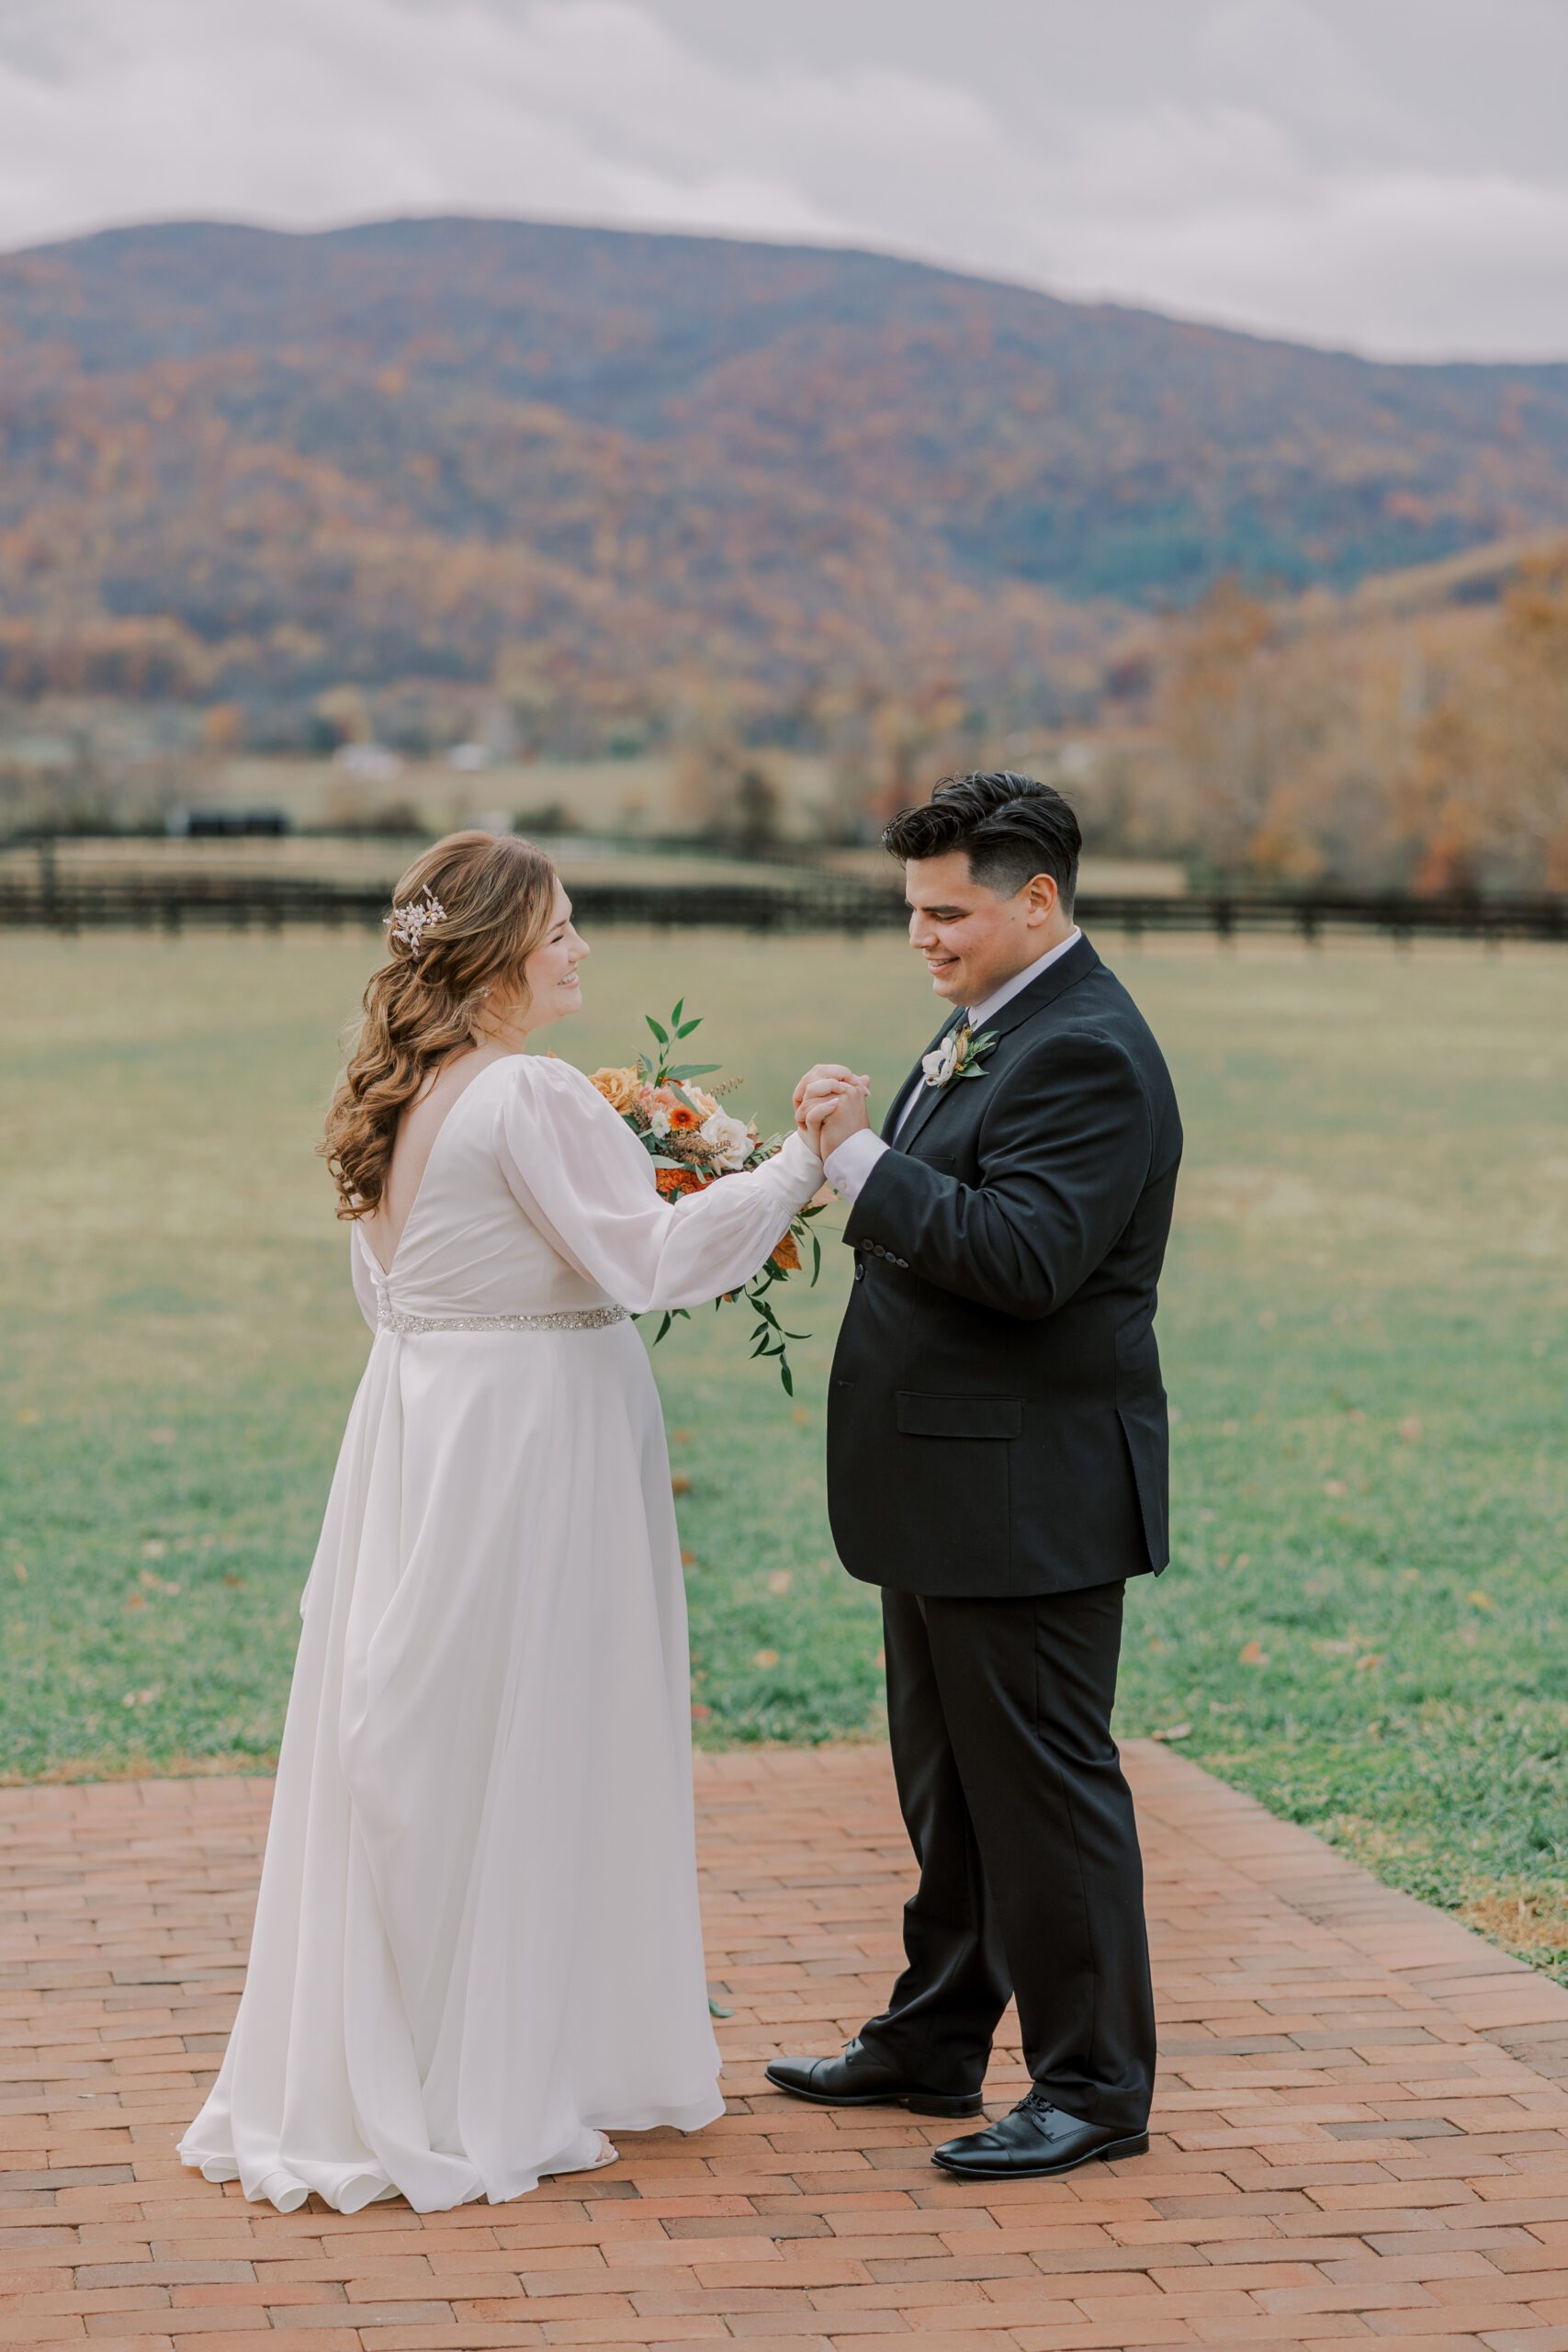 Groom and bride hold hands with beautiful mountains in background covered in orange trees